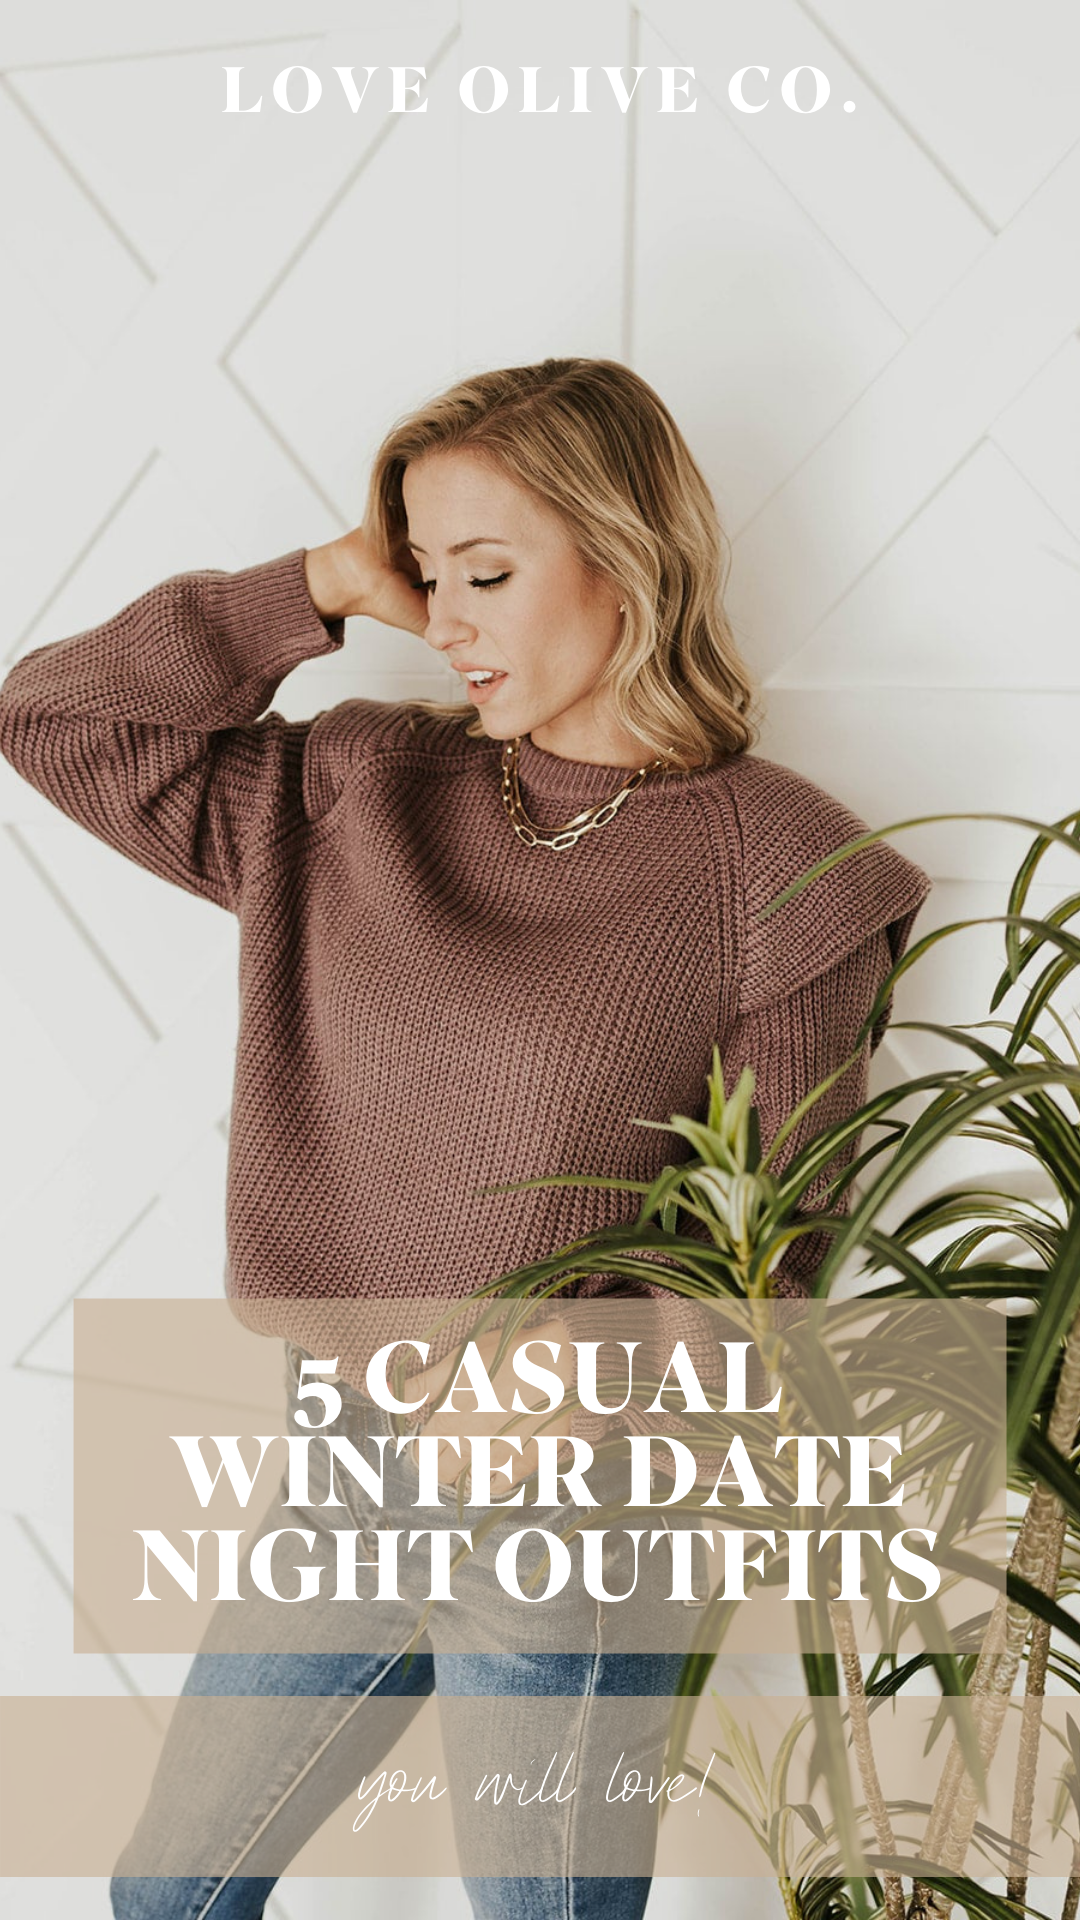 5 casual winter date night outfit ideas you'll love. www.loveoliveco.com